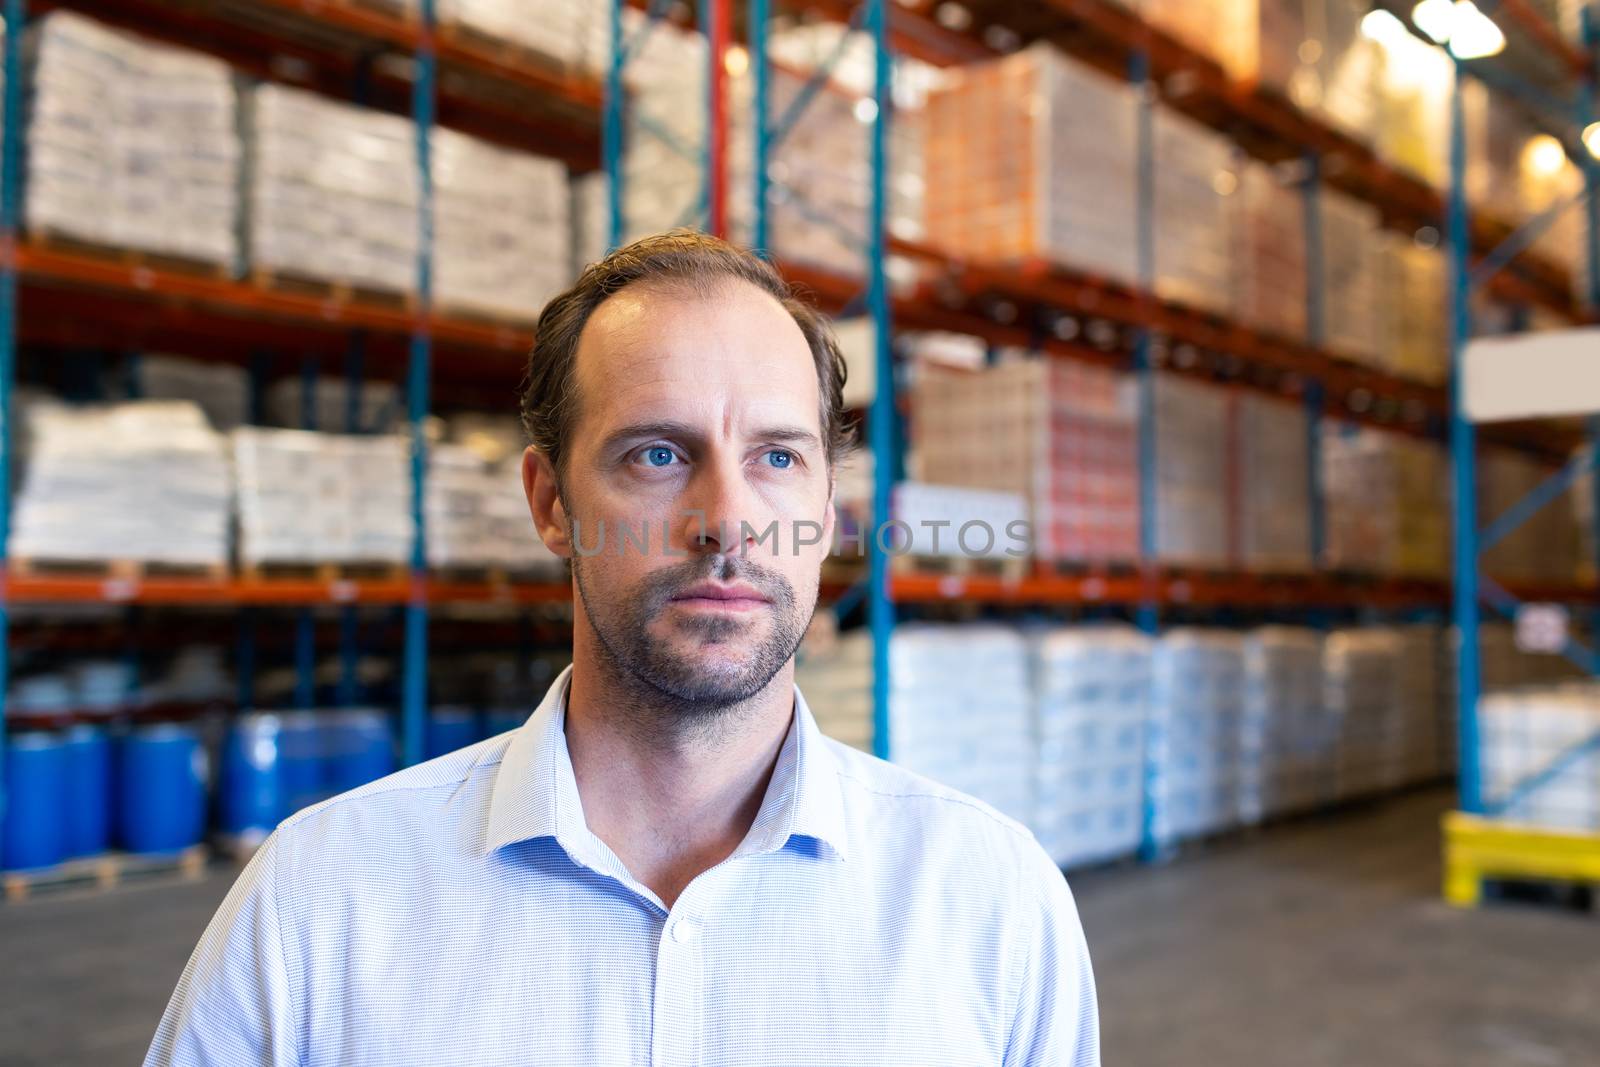 Portrait close-up of handsome mature Caucasian male supervisor looking away in warehouse. This is a freight transportation and distribution warehouse. Industrial and industrial workers concept